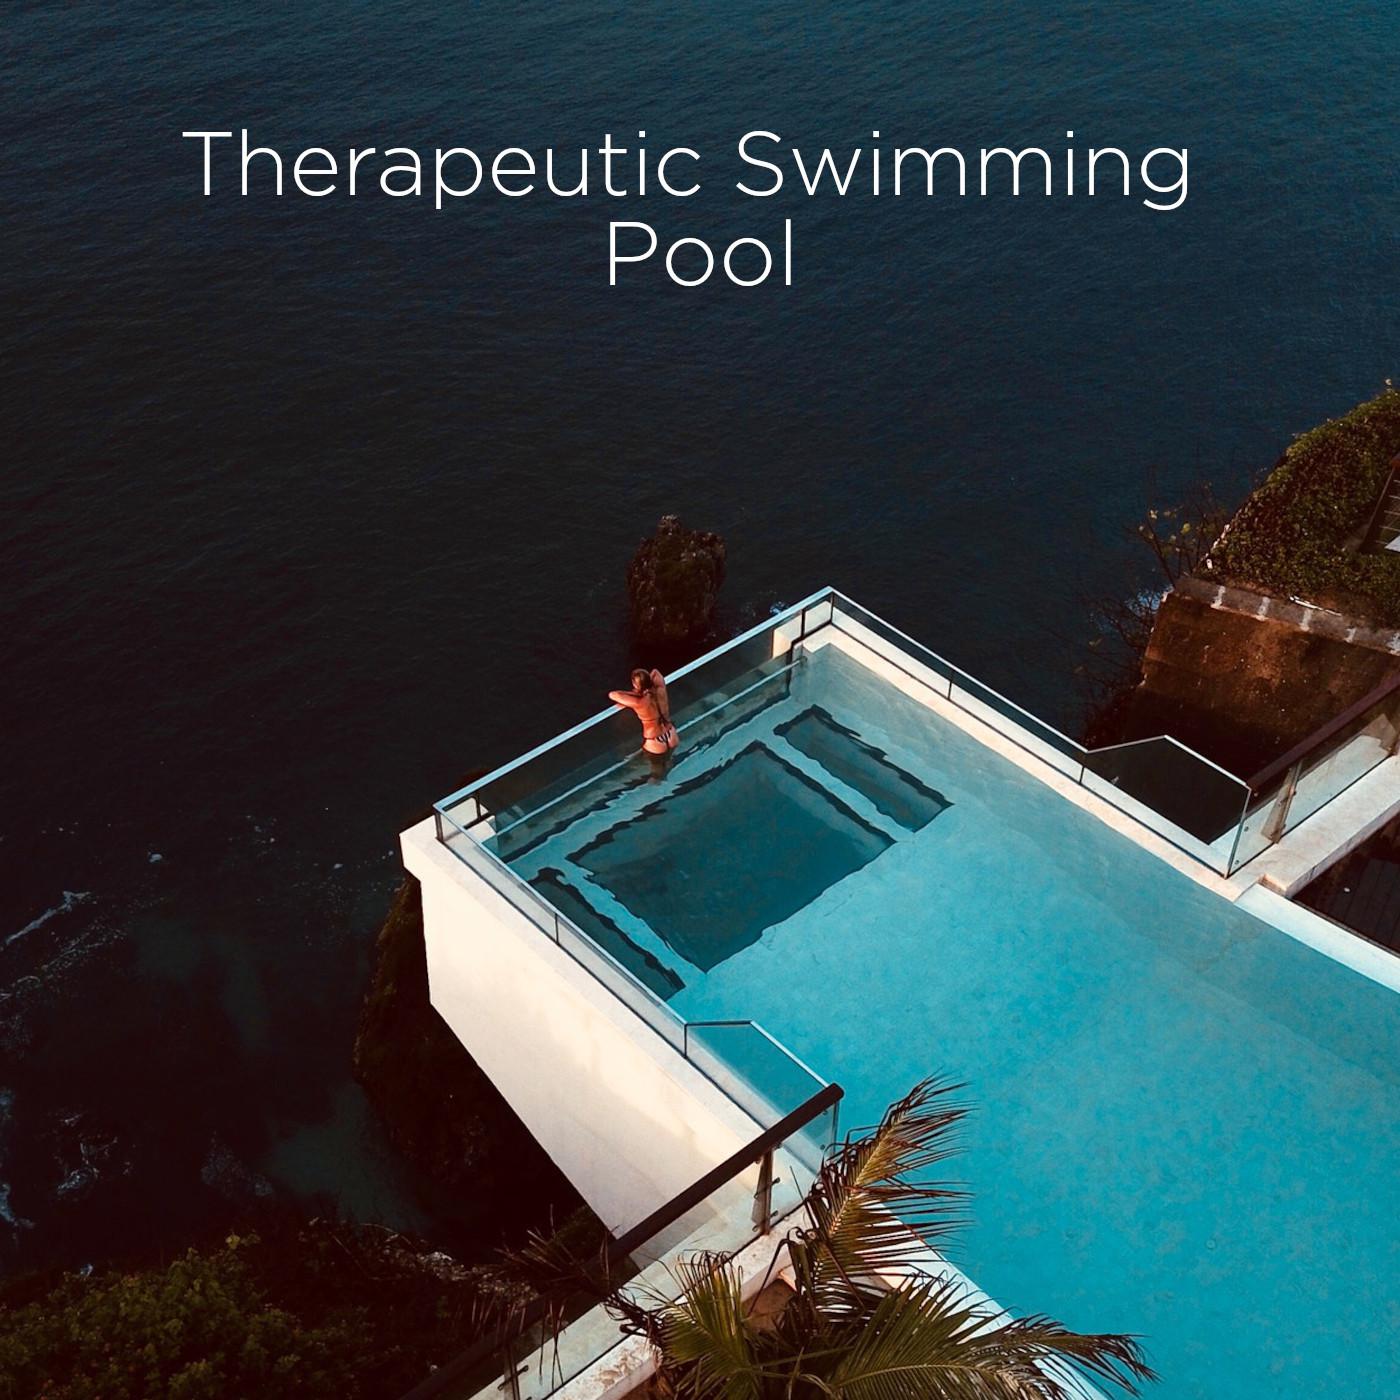 Therapeutic Swimming Pool & Water Splashes